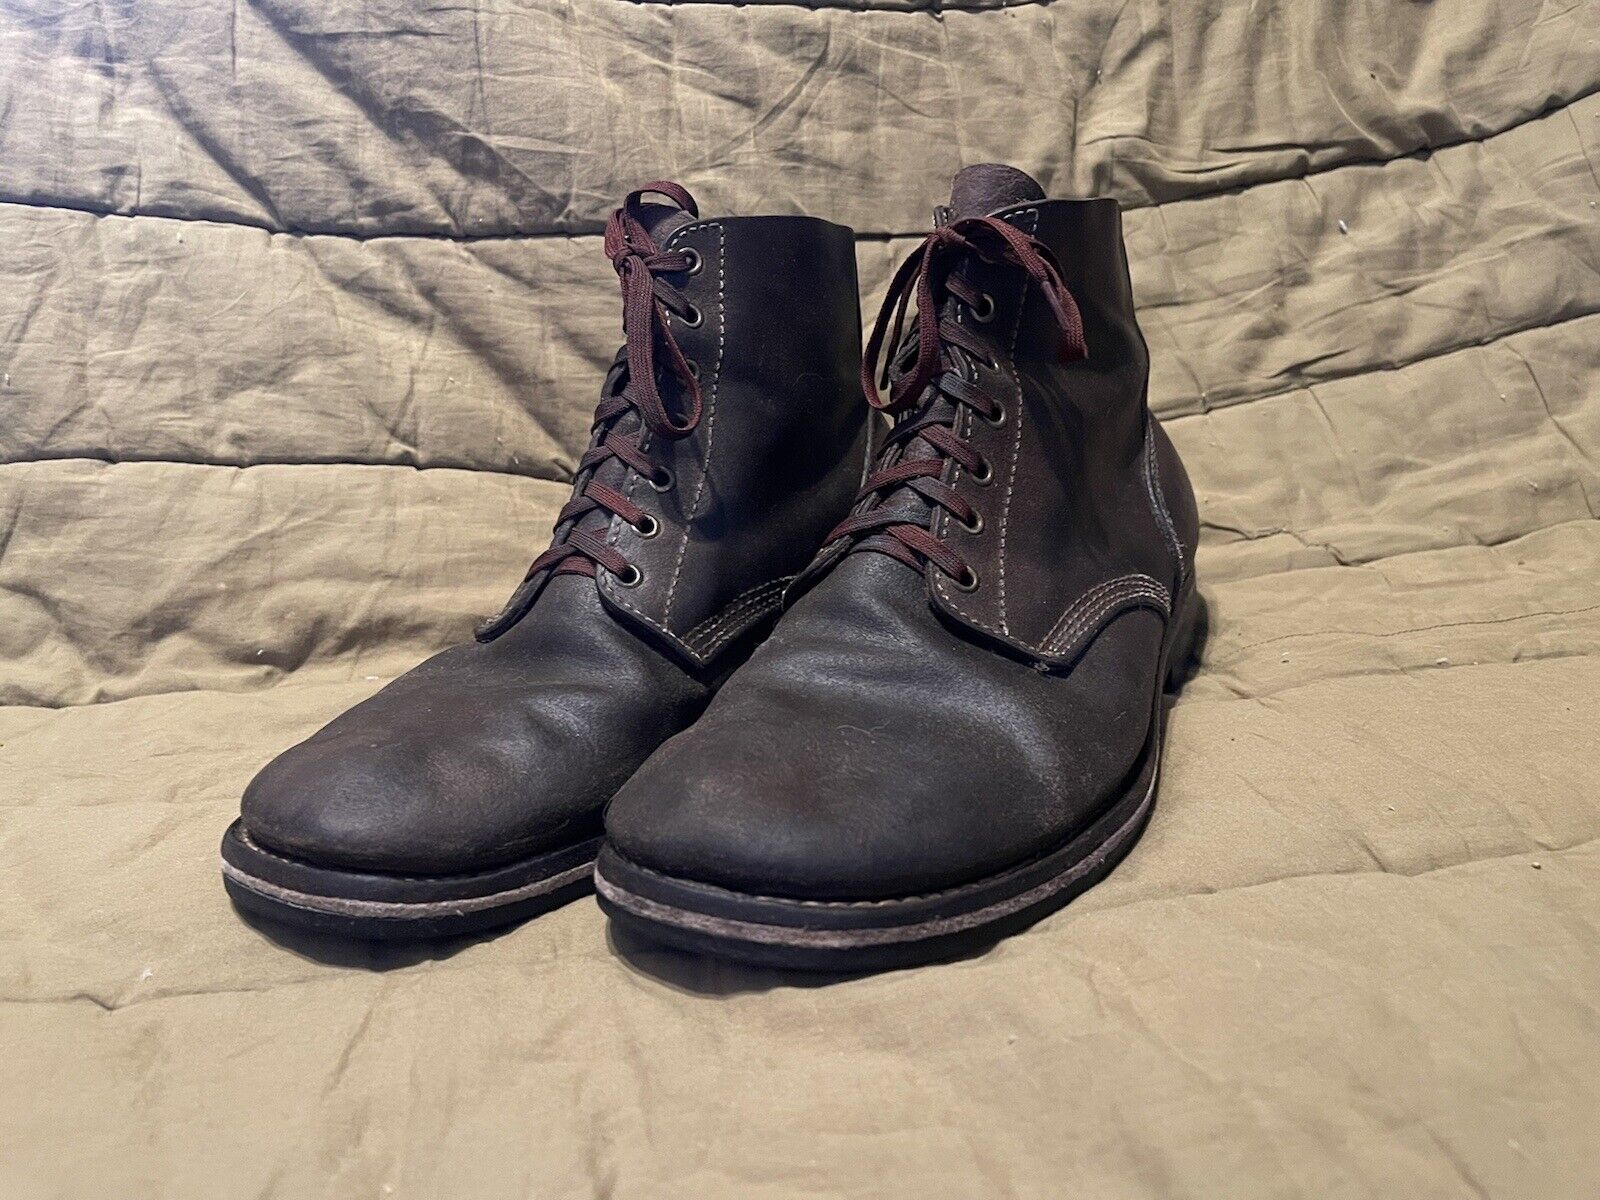 Reproduction WWII Roughout Boots Fits Foot Sizes 10-11